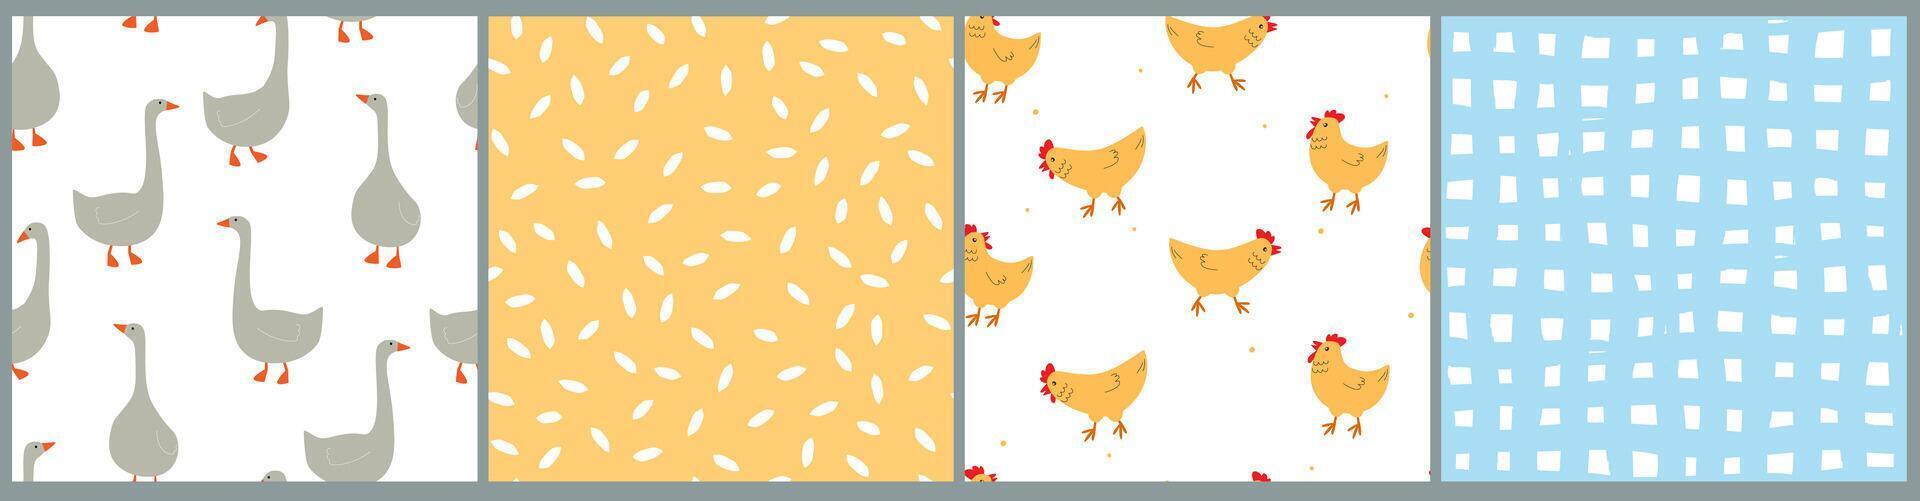 Set of seamless patterns with poultry, geese, chickens, abstract simple shapes, cage. Cute bird print. vector